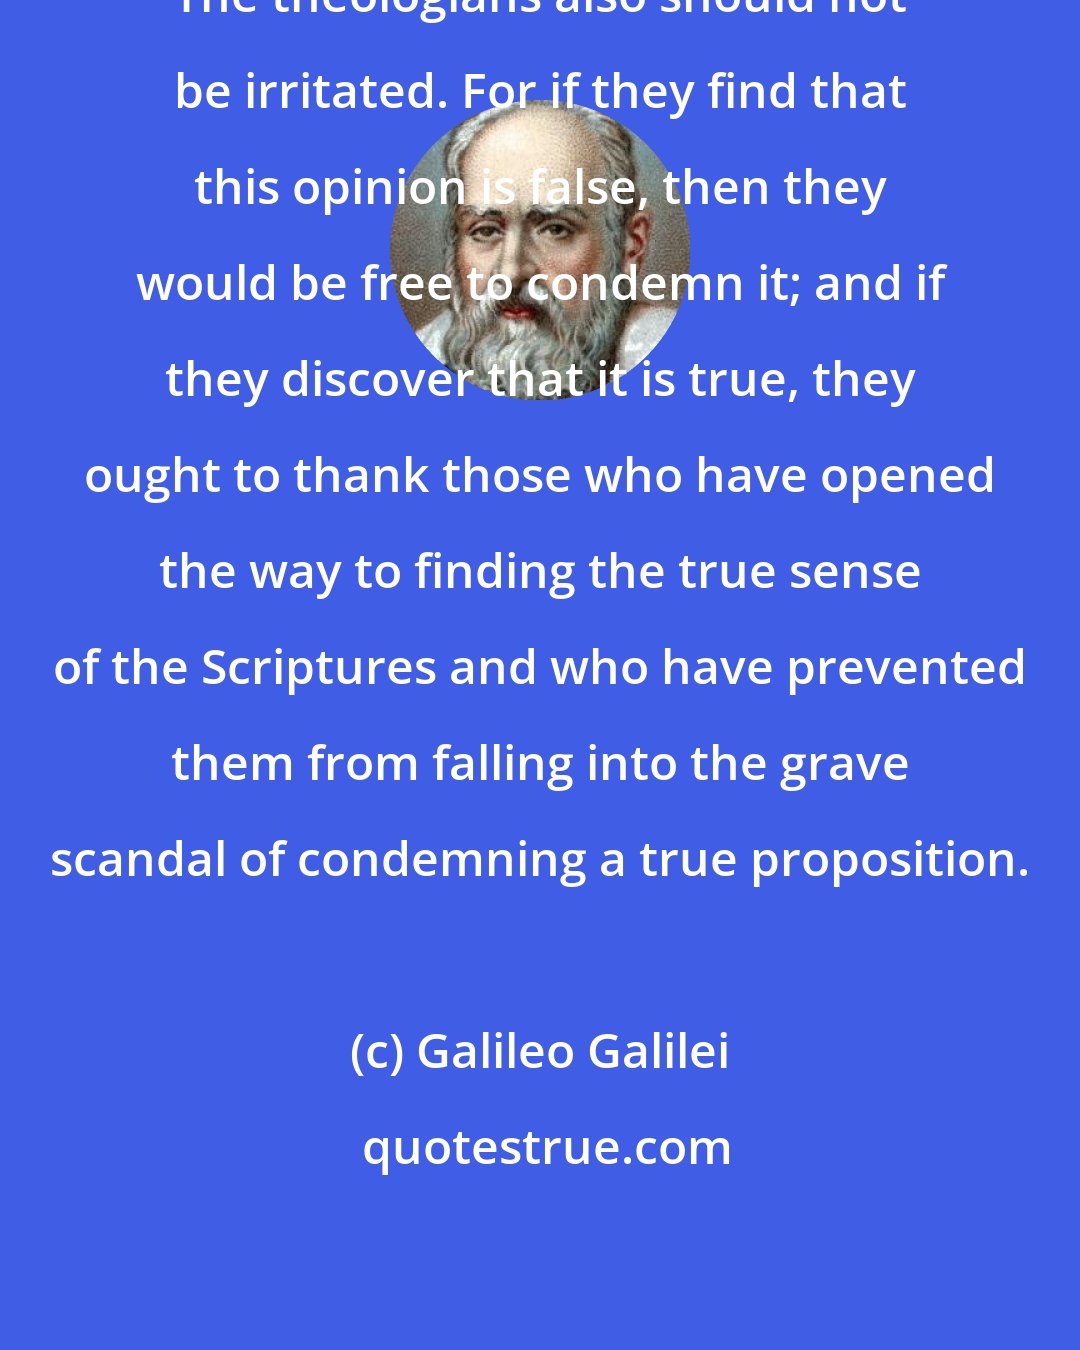 Galileo Galilei: The theologians also should not be irritated. For if they find that this opinion is false, then they would be free to condemn it; and if they discover that it is true, they ought to thank those who have opened the way to finding the true sense of the Scriptures and who have prevented them from falling into the grave scandal of condemning a true proposition.